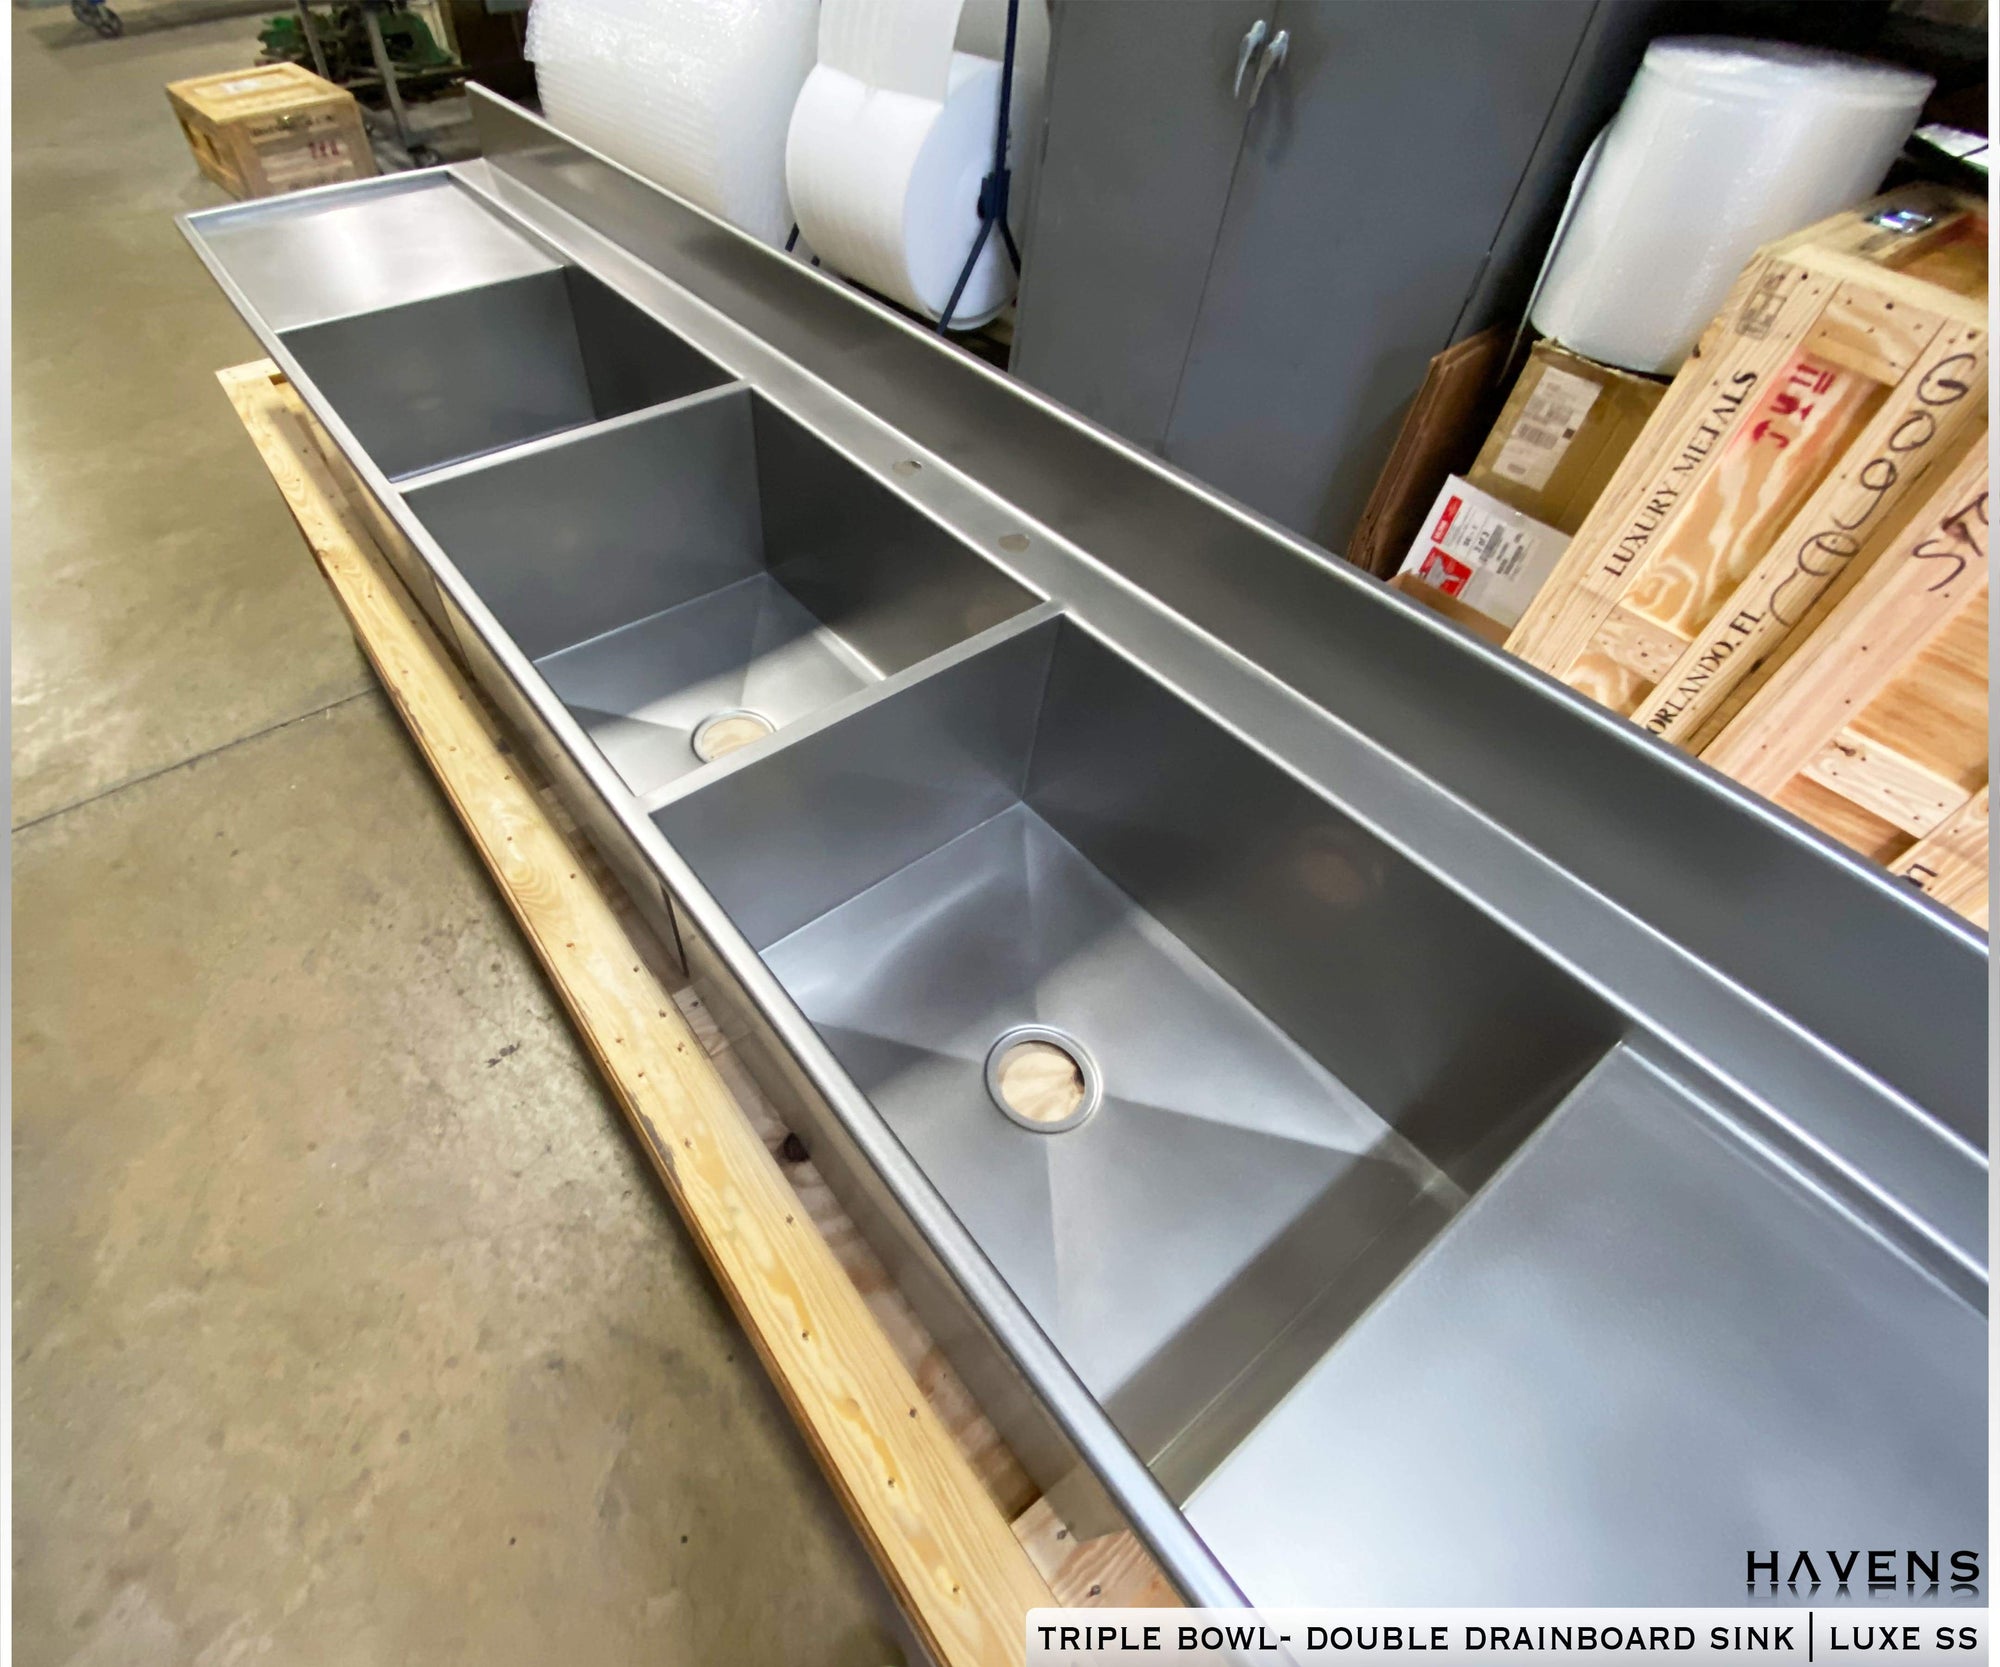  CUSTOM - BUILT TO ORDER - Stainless Steel Built-to-Order Dish  Drain Board: Home & Kitchen